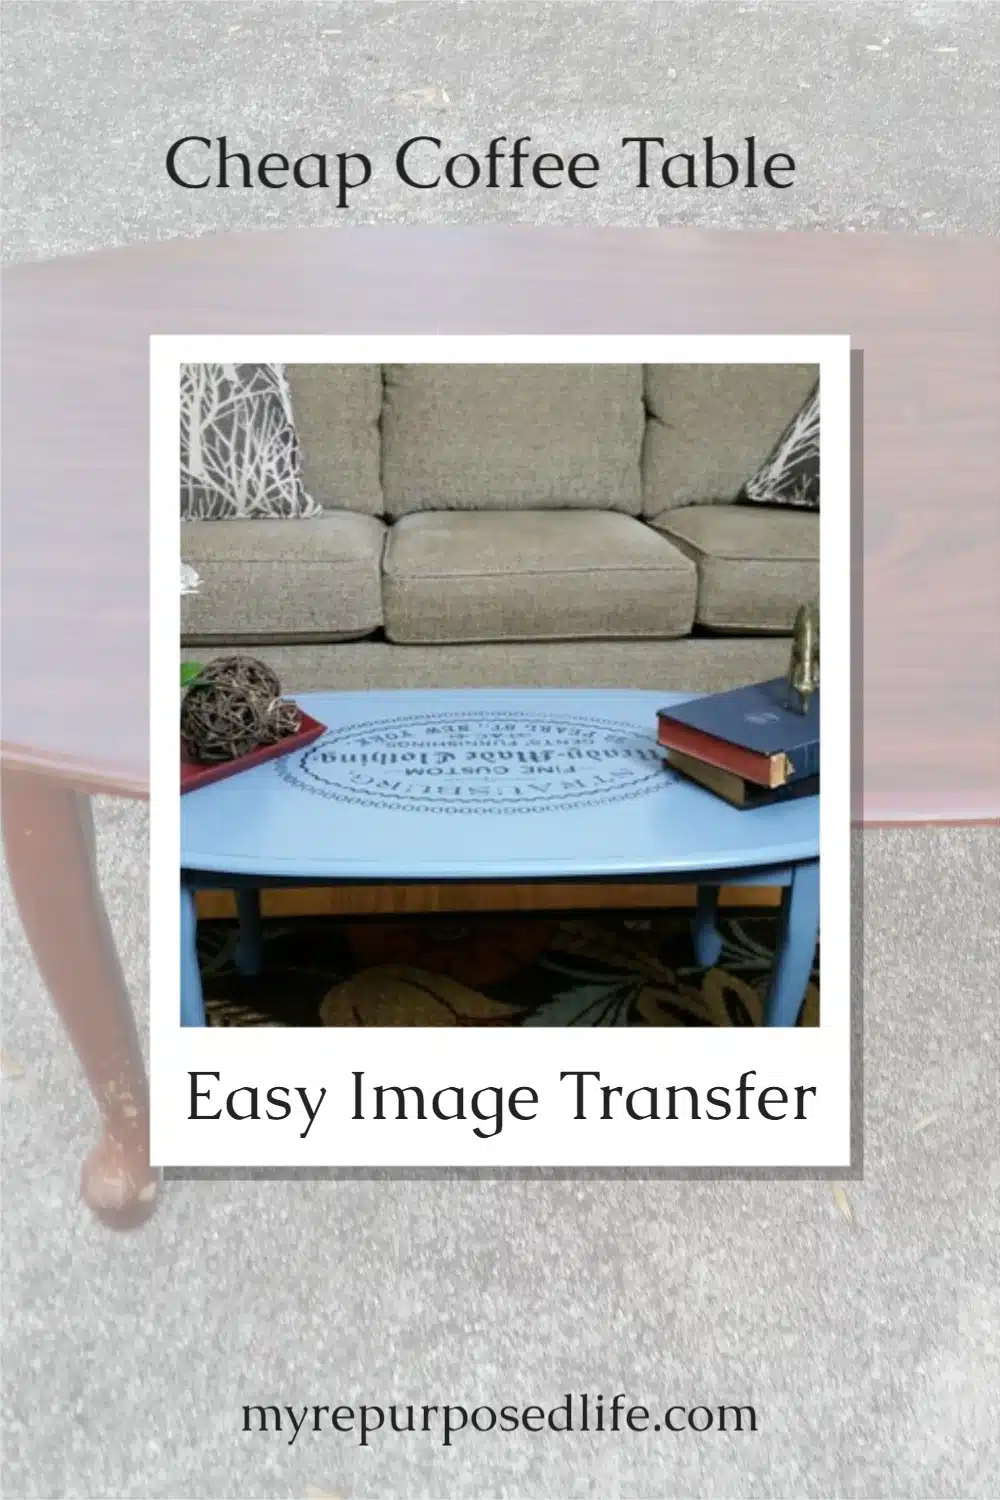 I did an easy image transfer on an old coffee table using 1Gel from Heirloom Traditions Paint. Transferring images is a fun way to update old furniture. via @repurposedlife